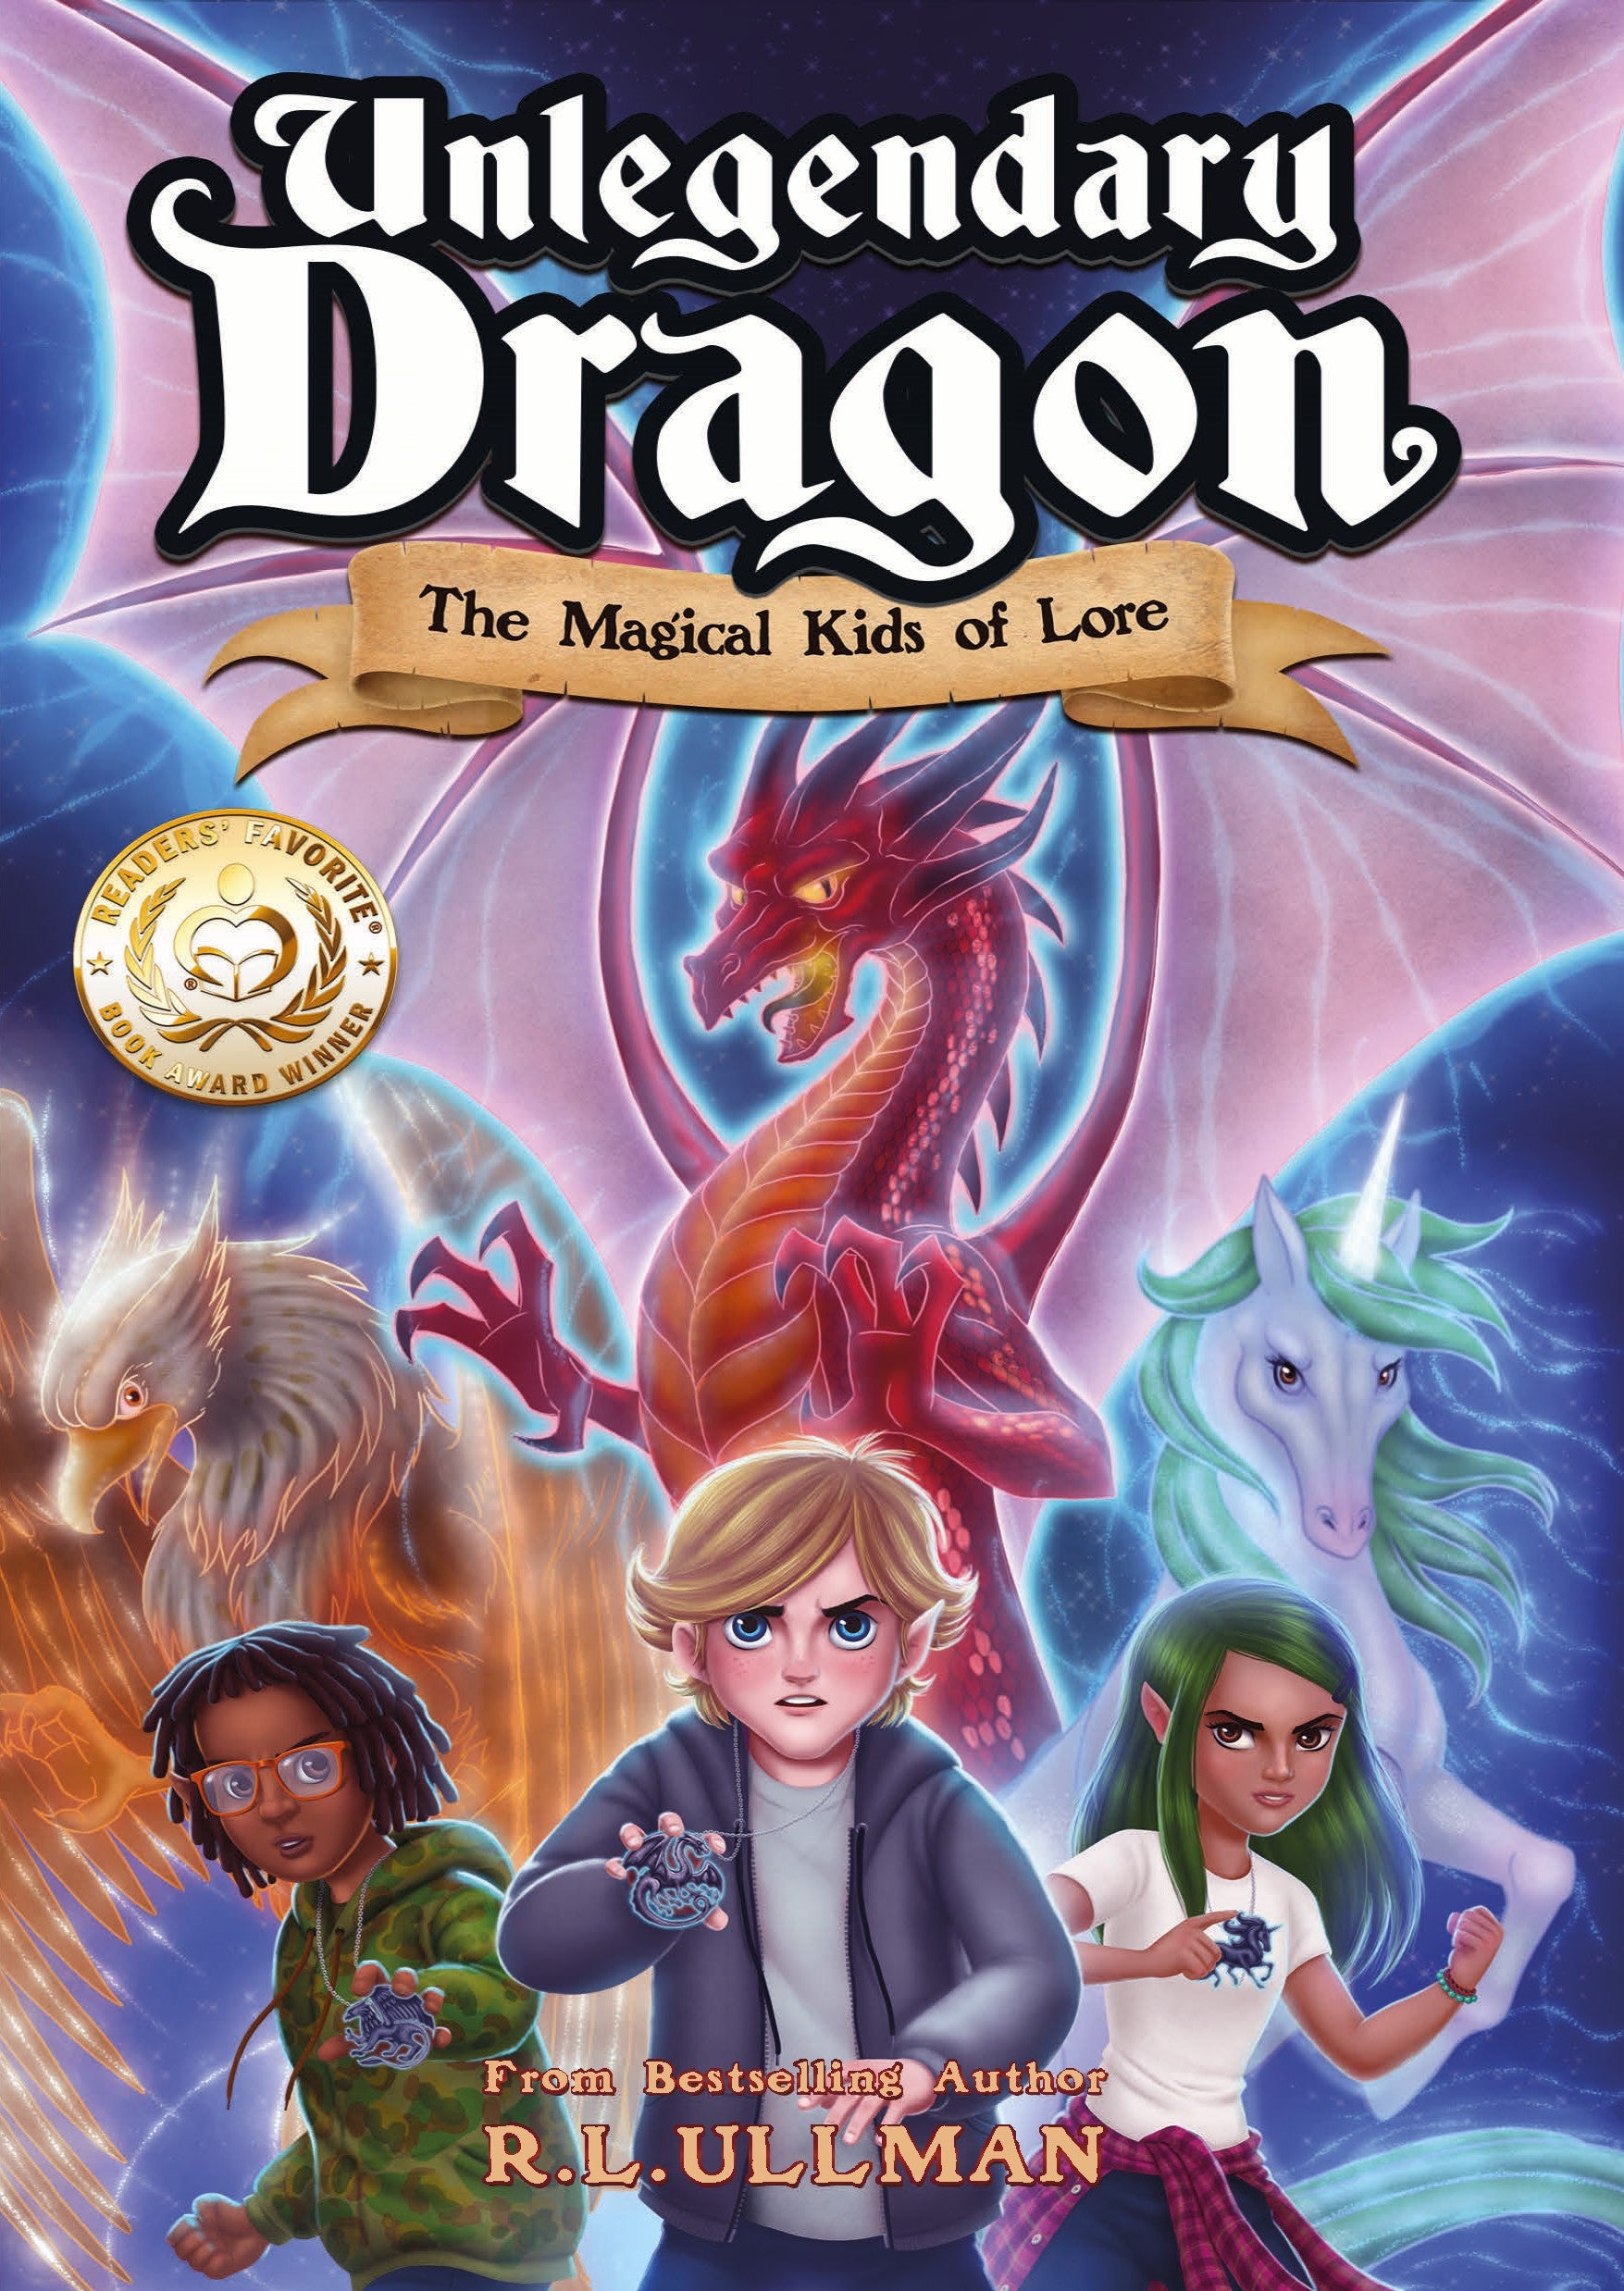 Unlegendary Dragon: The Magical Kids of Lore (Paperback)